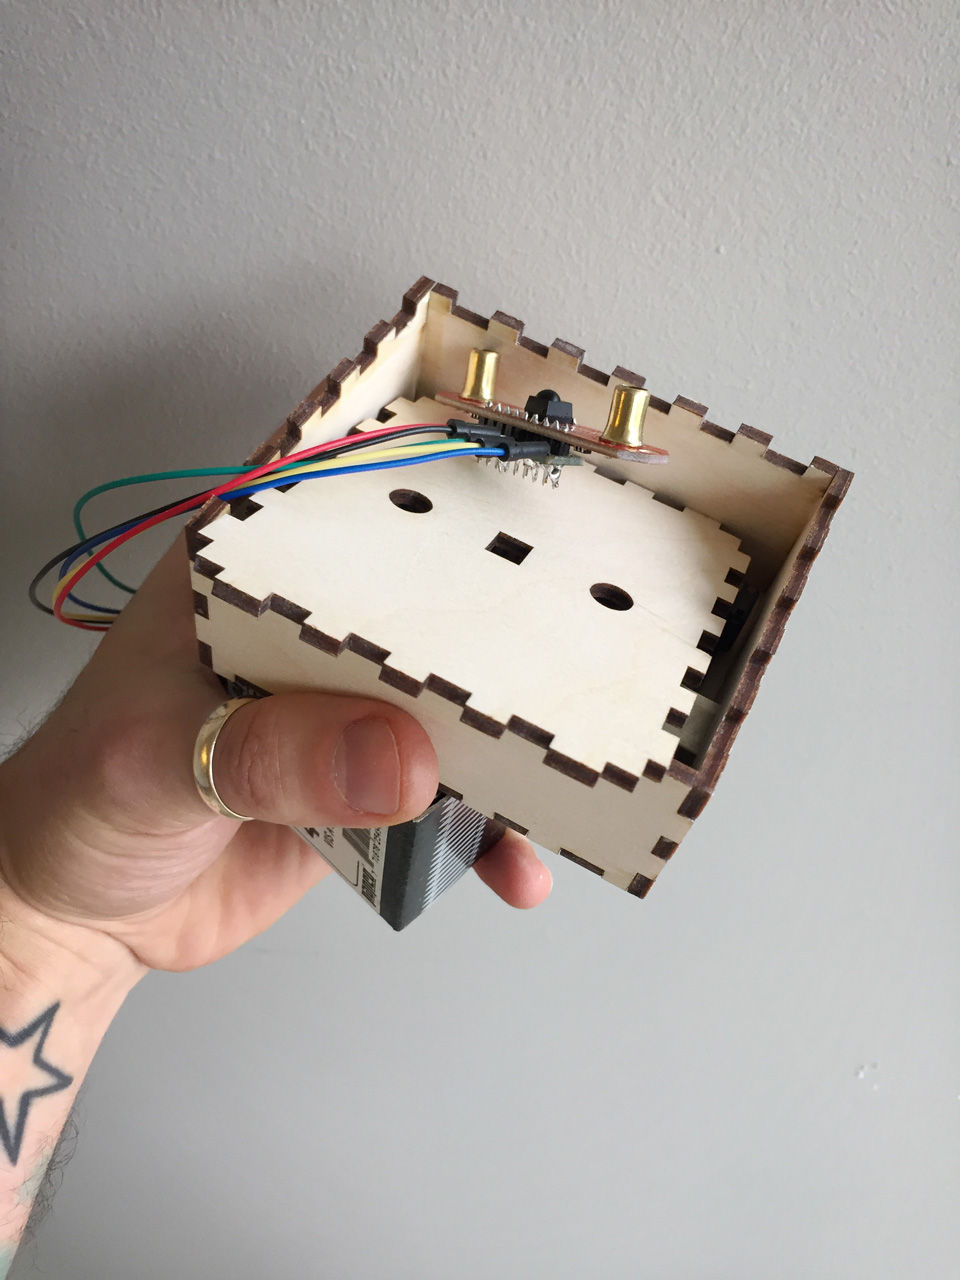 ZX Sensor Box with wires dangling